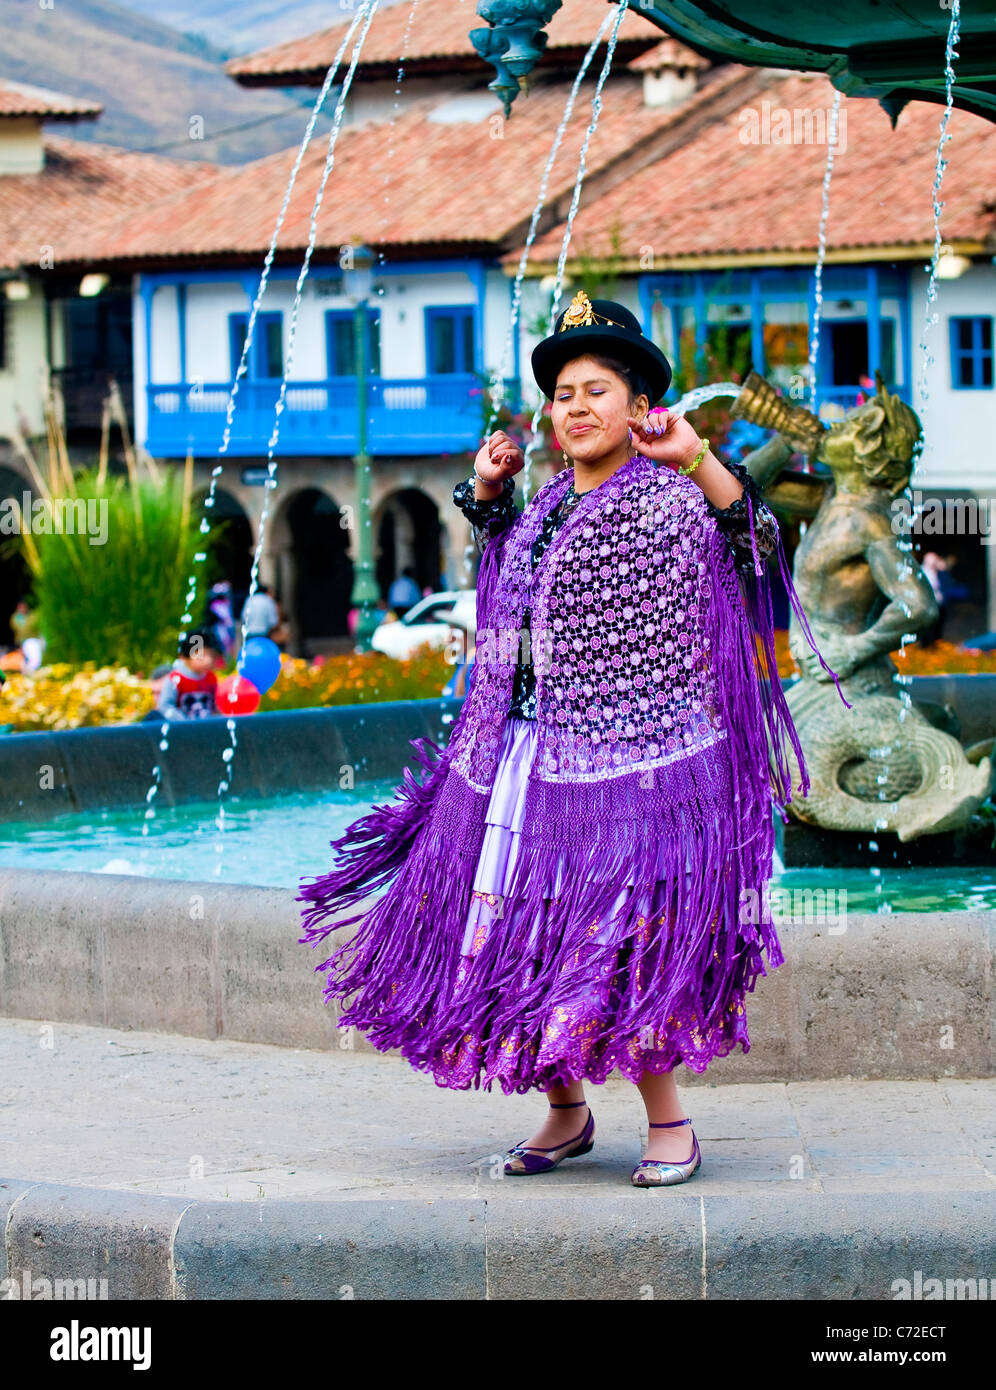 Peruvian dancer with traditional clothes dancing in street in Cusco Peru Stock Photo